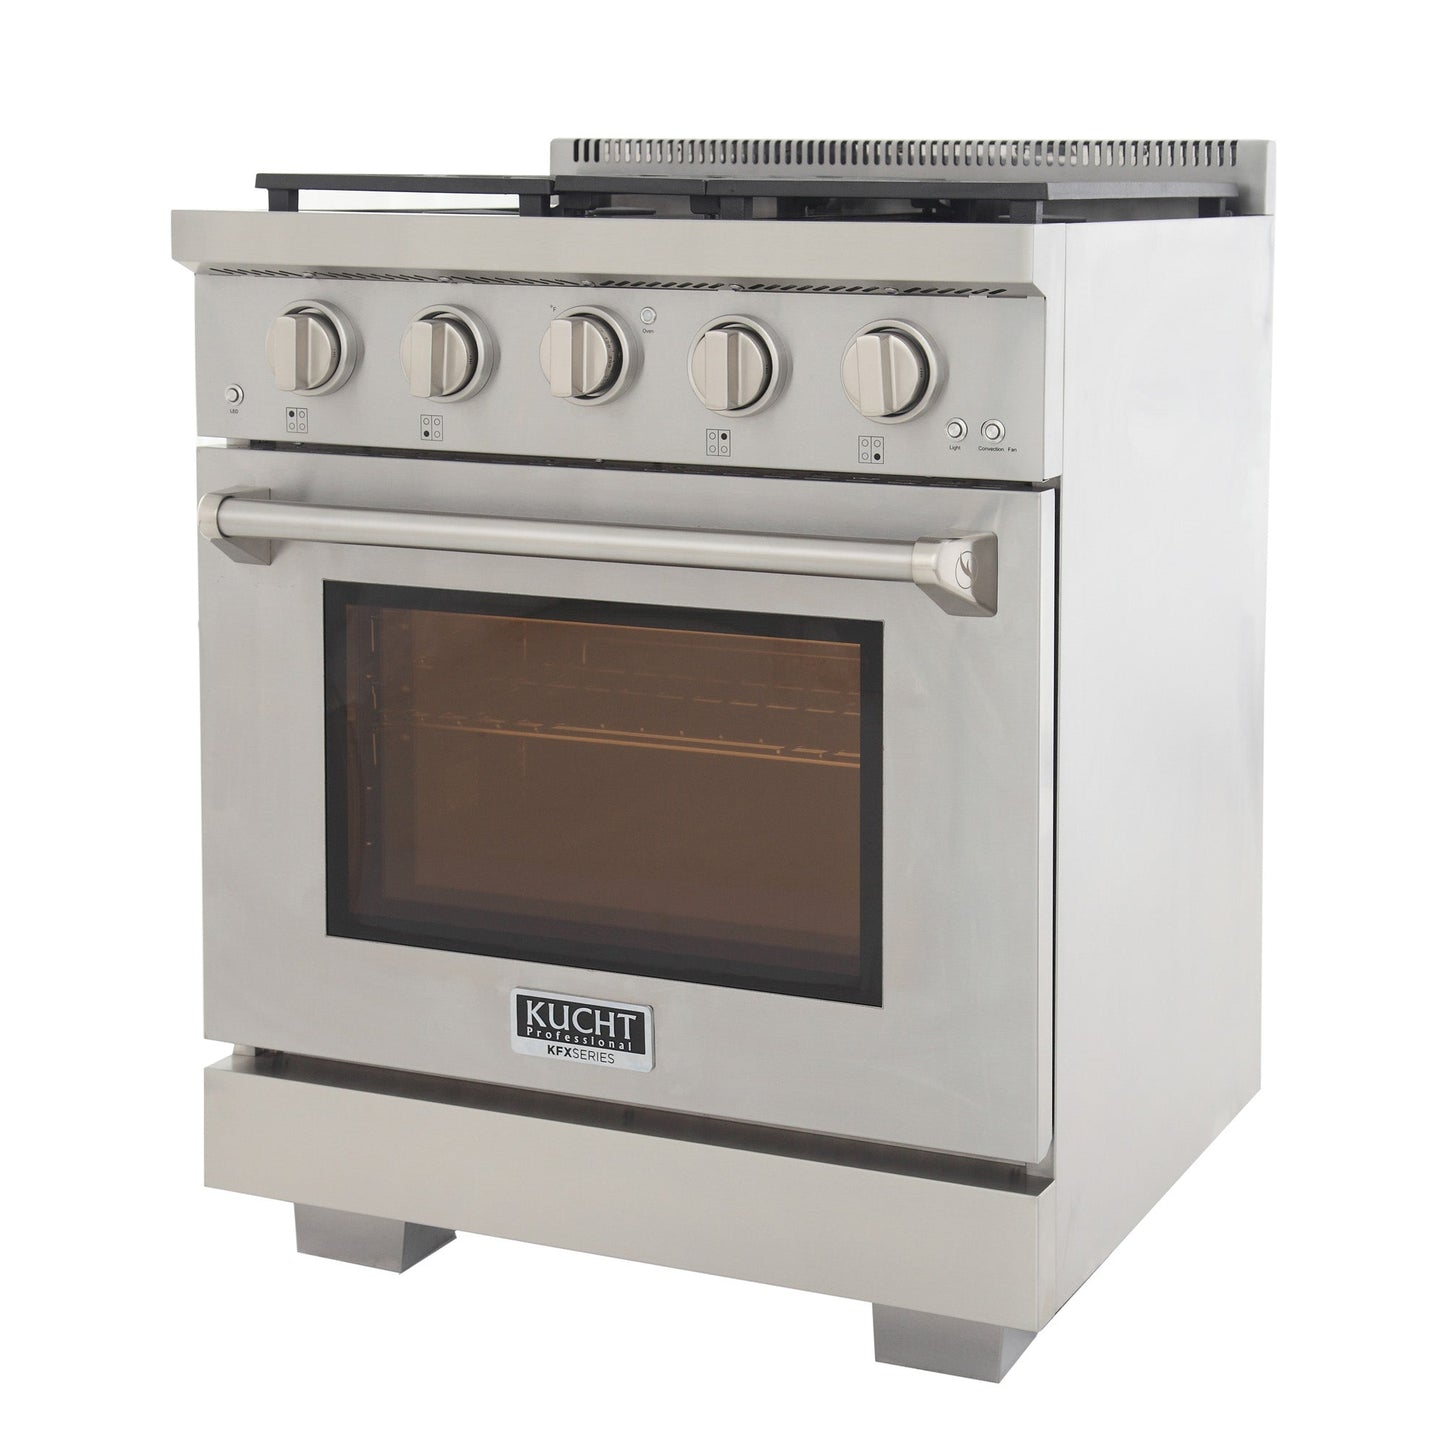 Kucht KFX Series 30" Freestanding Natural Gas Range With 4 Burners and Classic Silver Knobs